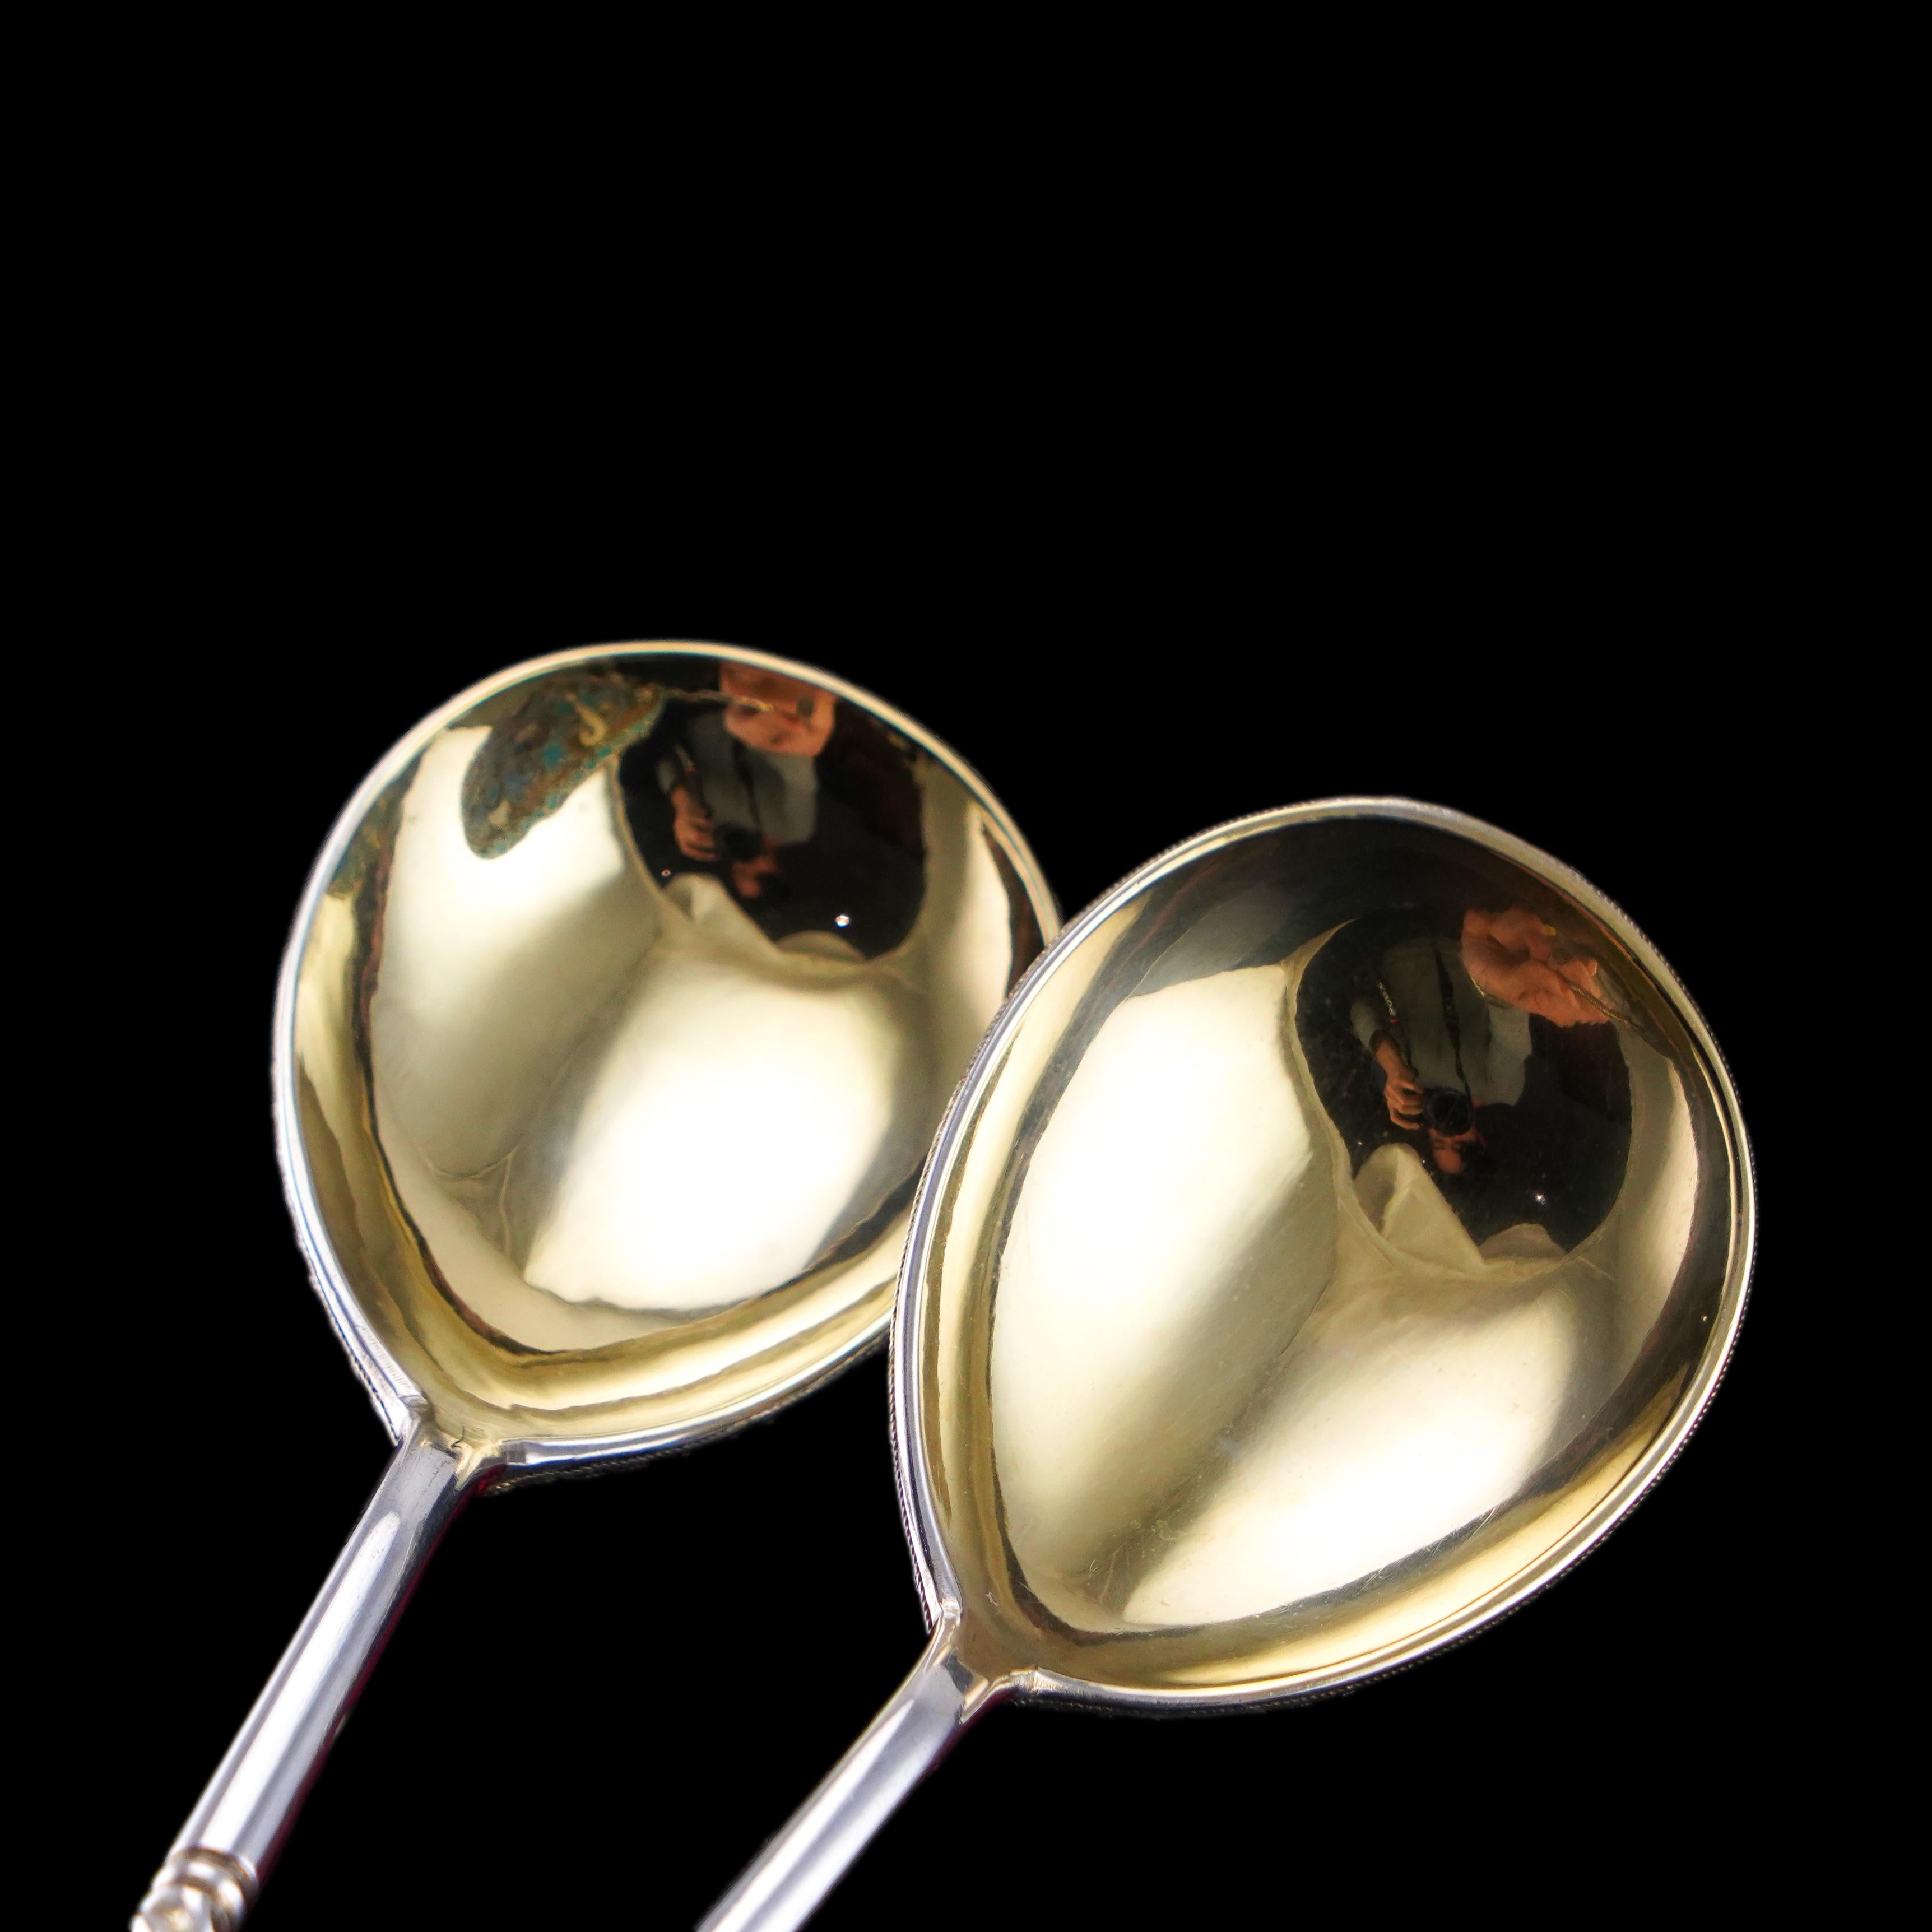 Antique Imperial Russian Solid Silver Spoons with Cloisonne Enamel c.1882 For Sale 6